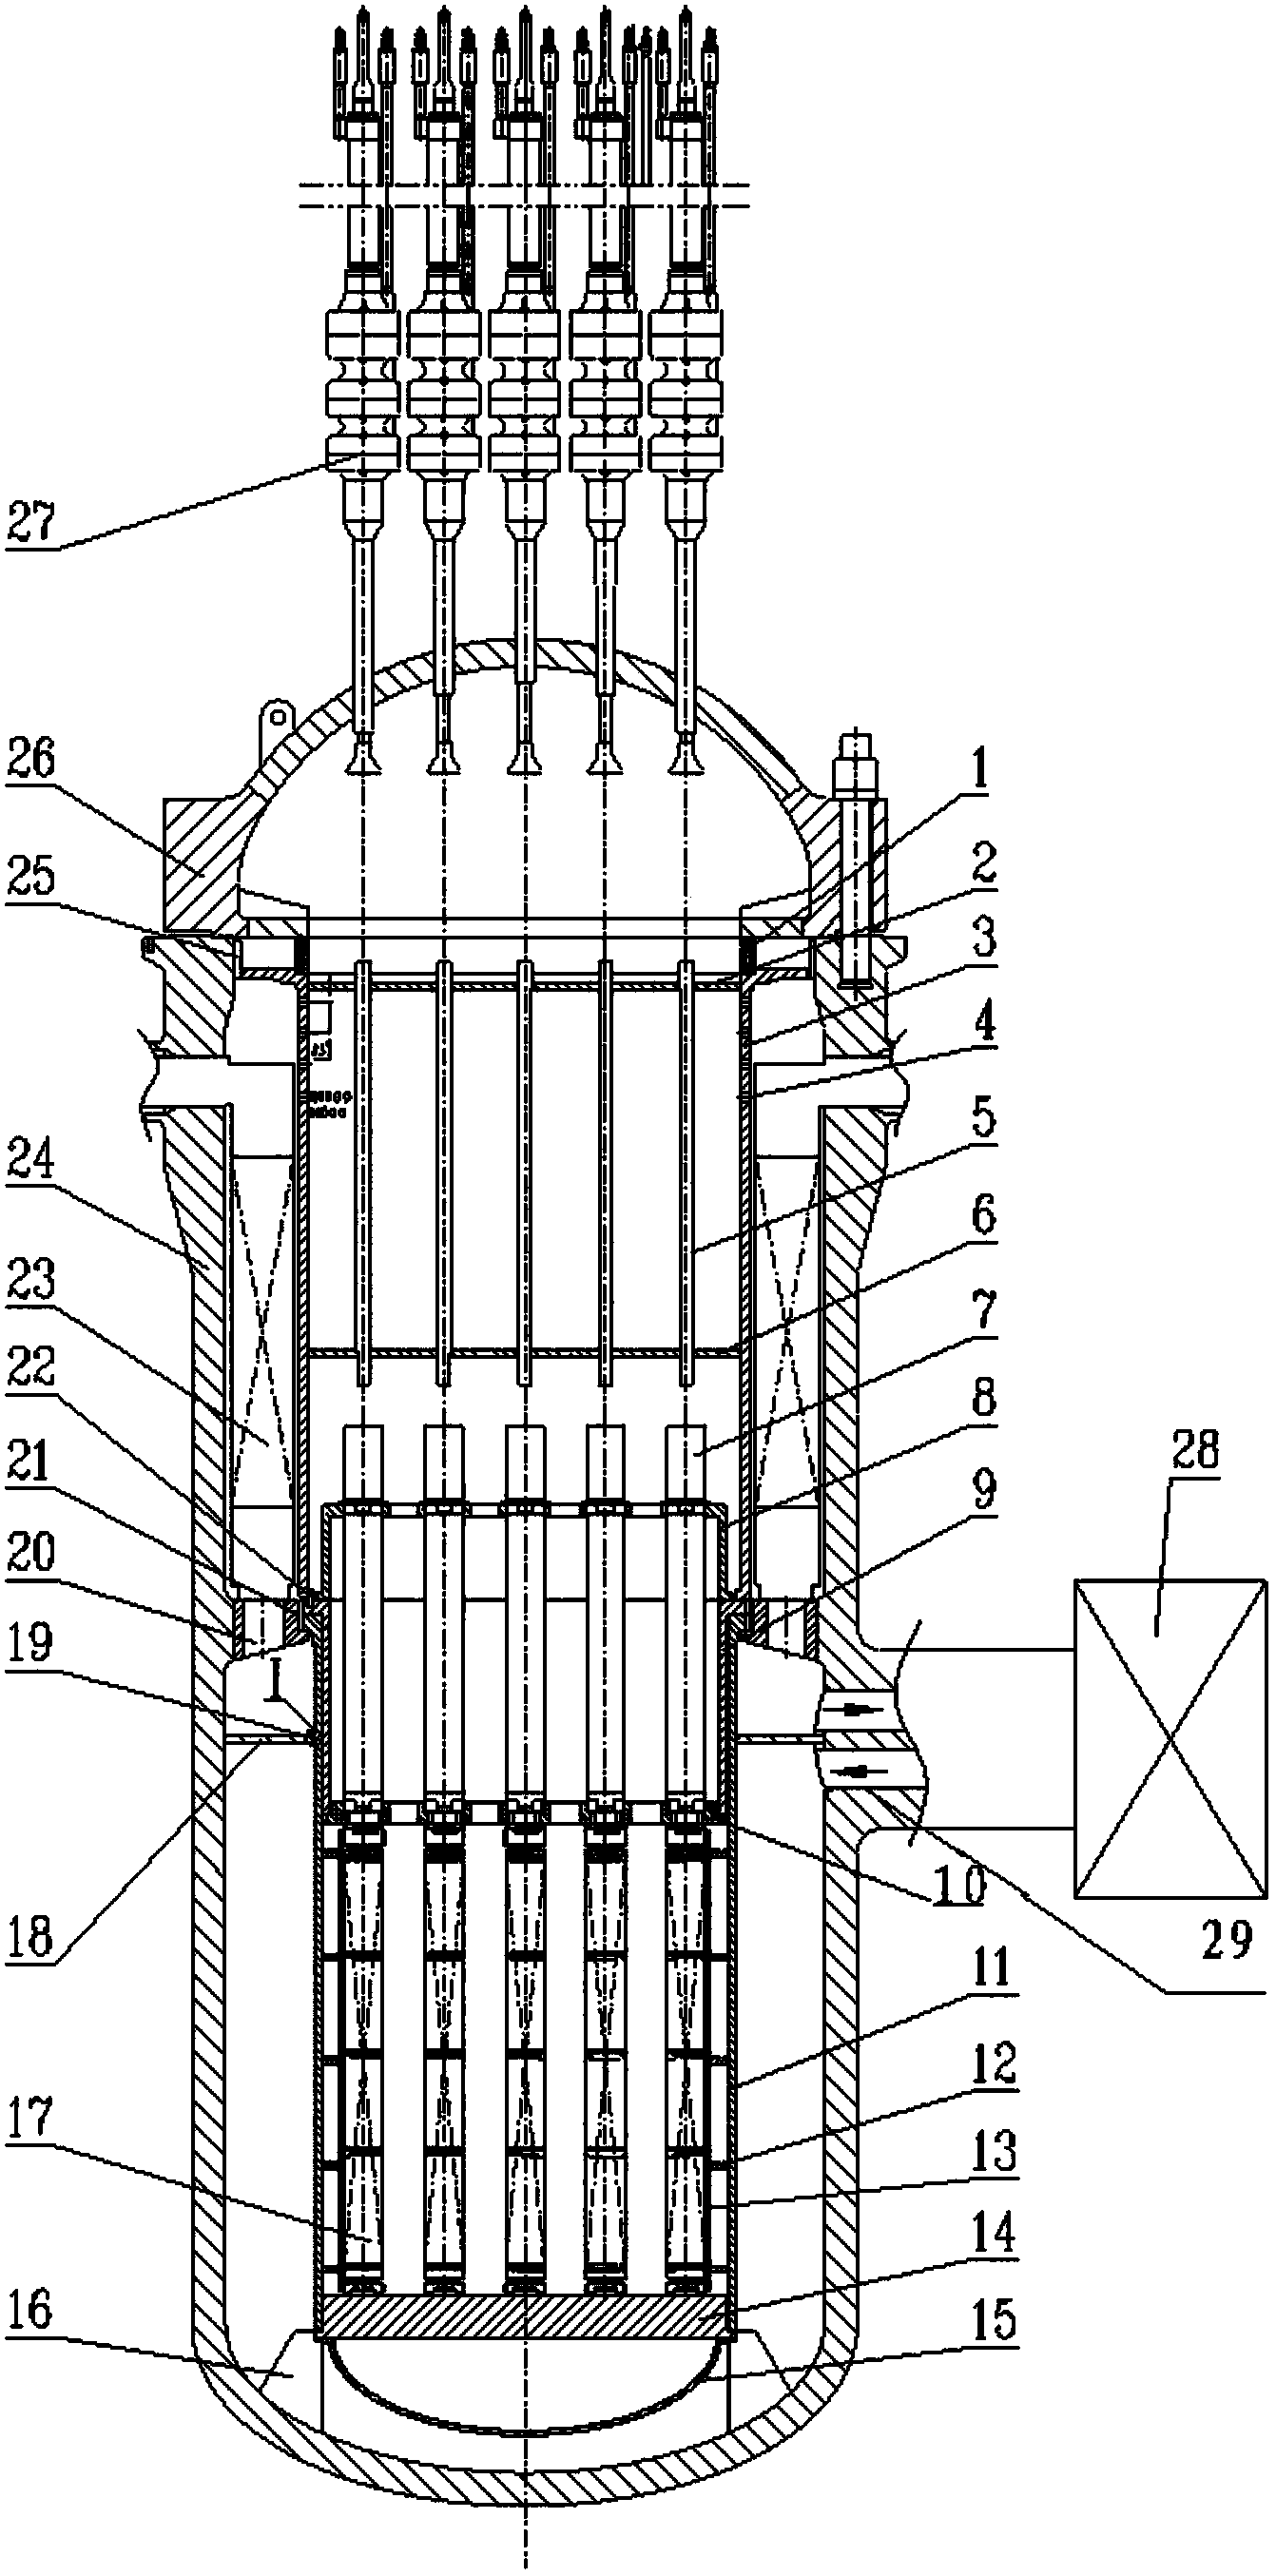 Split-type integral pressurized water reactor with down-suspended basket